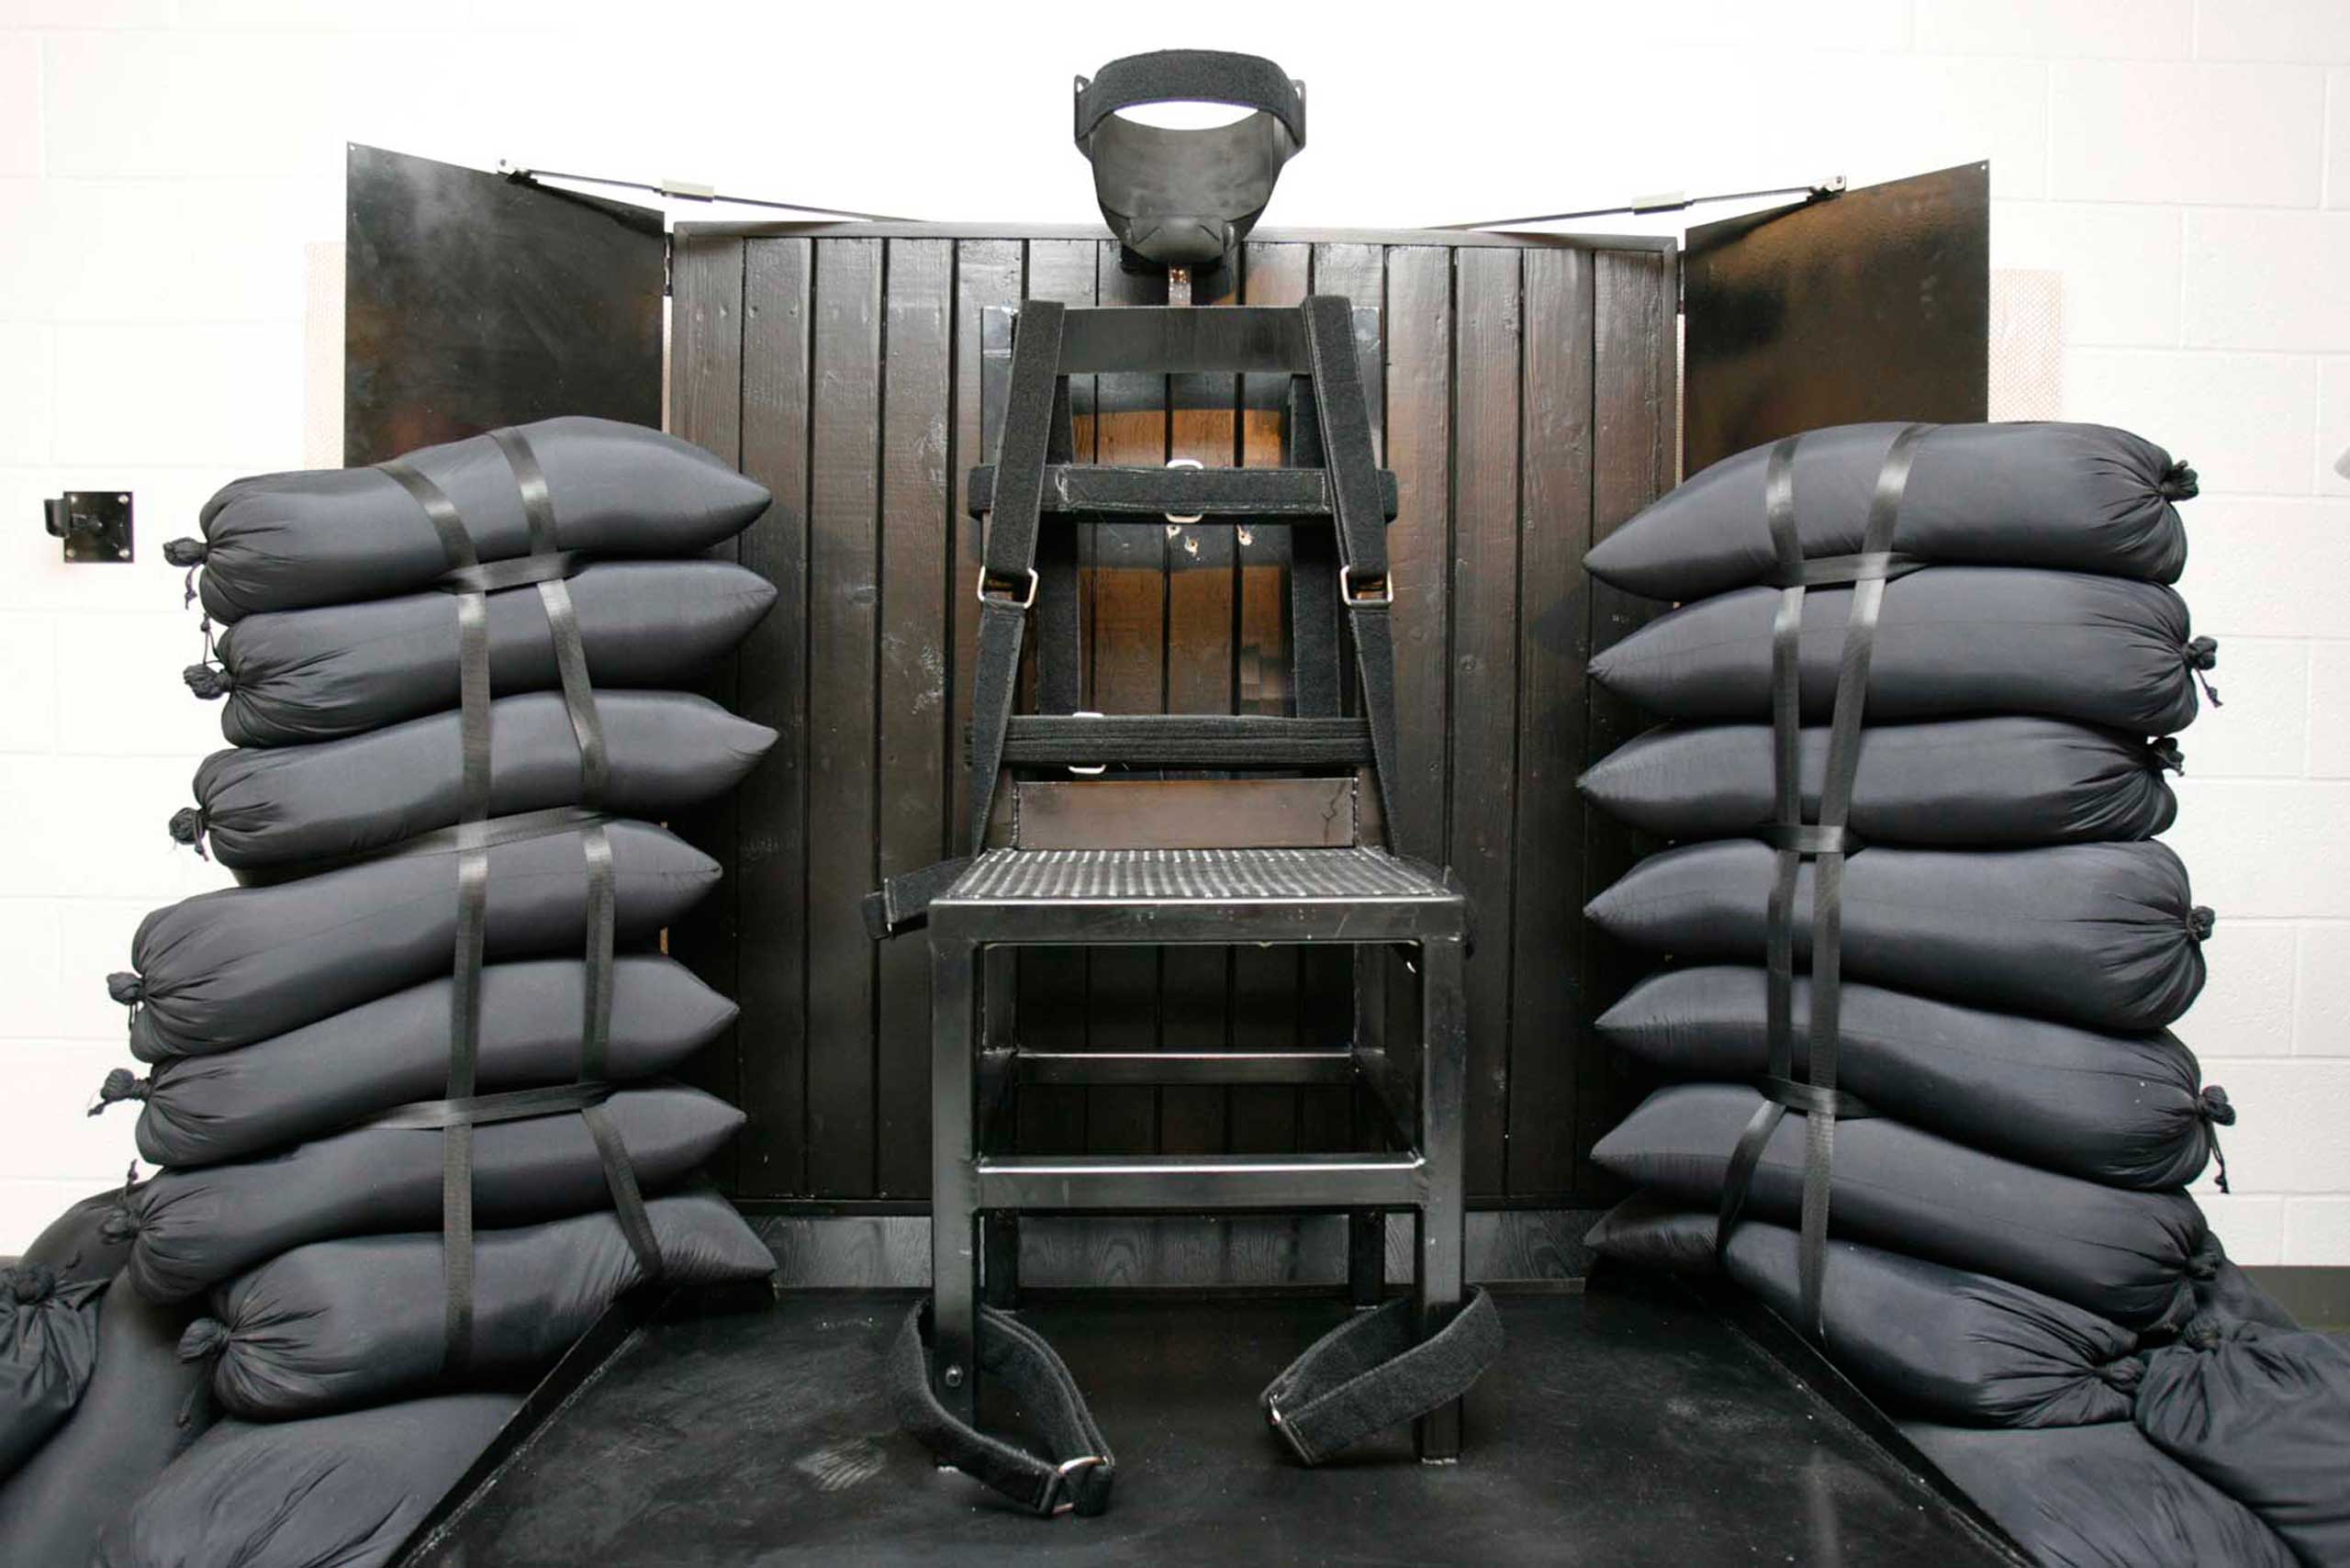 The execution chamber at the Utah State Prison after Ronnie Lee Gardner was executed by firing squad, with visible bullet holes, on June 18, 2010 in Draper, Utah. (Trent Nelson—AP)